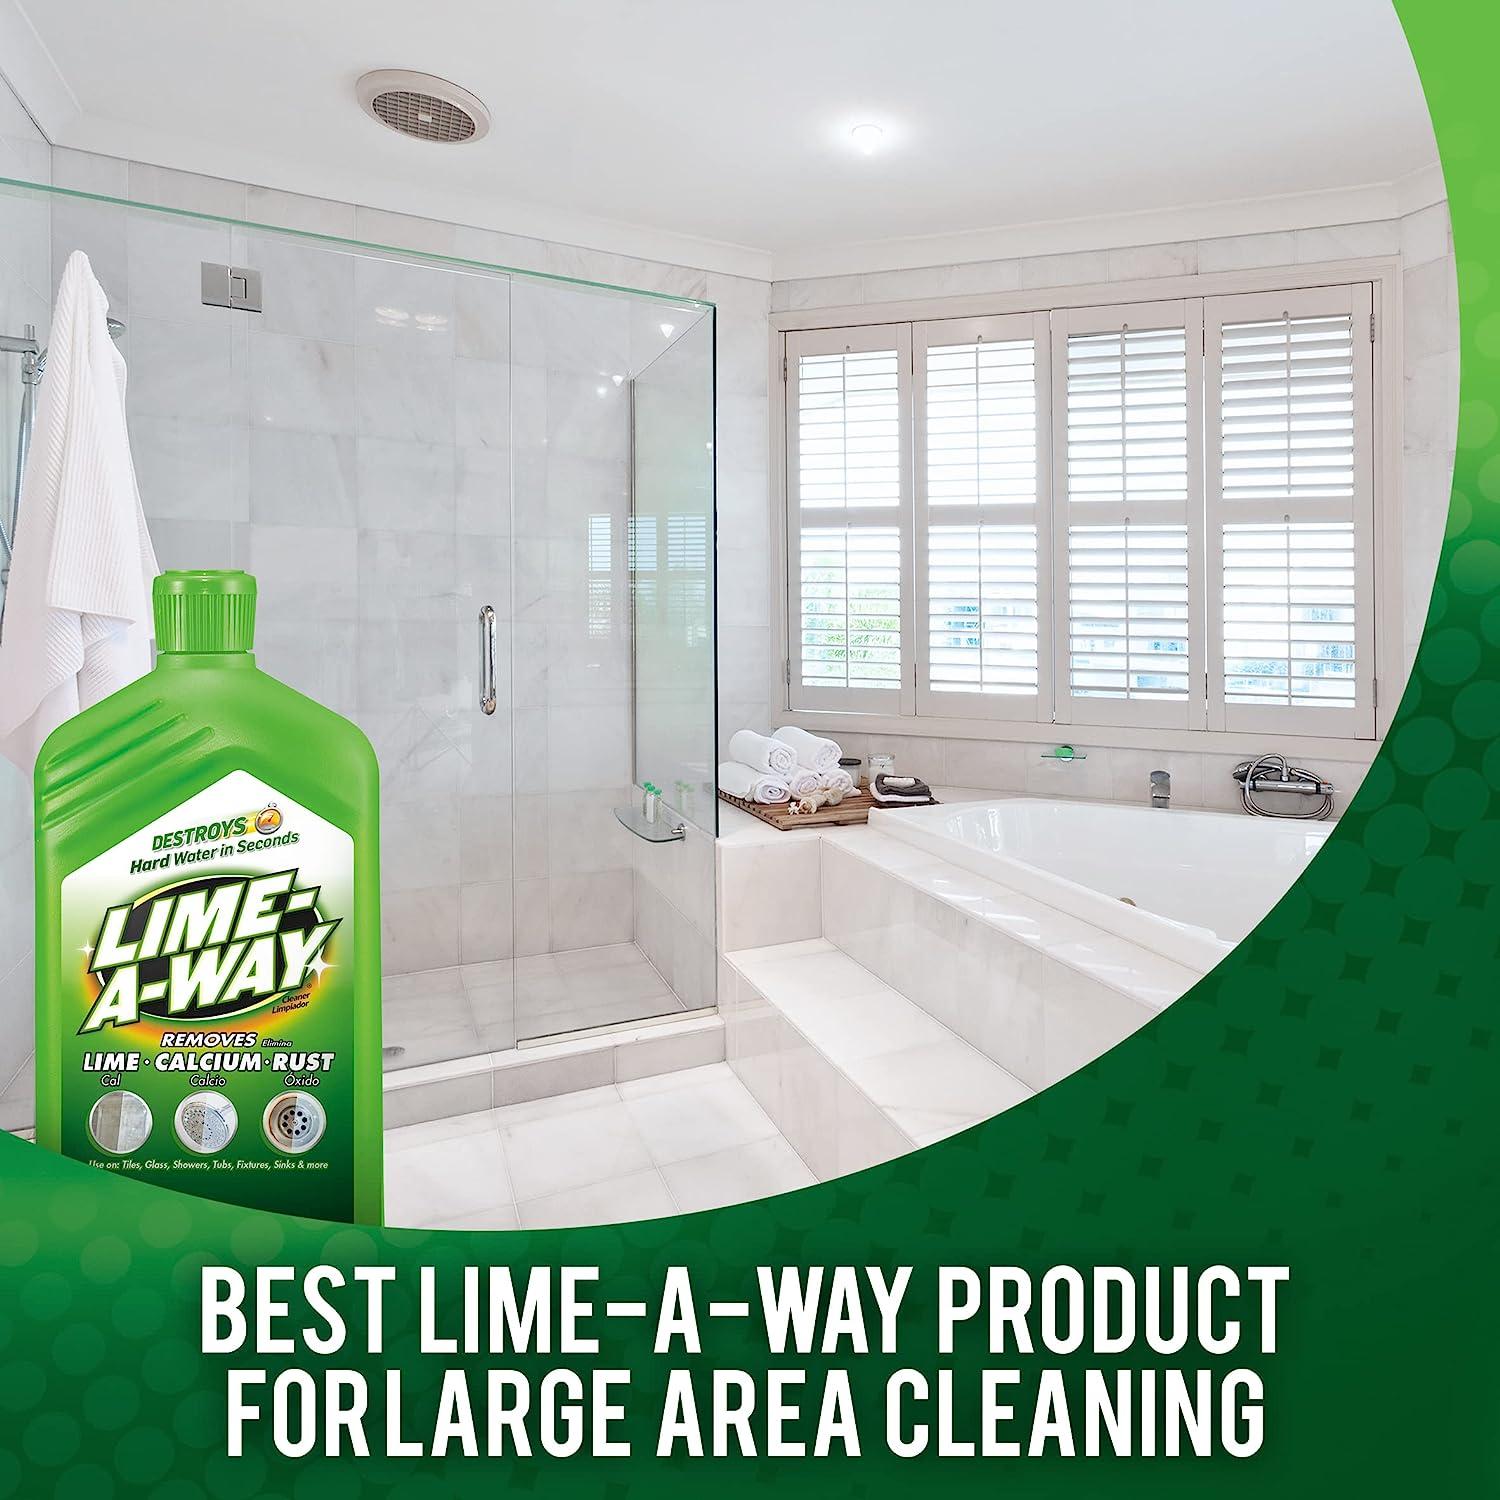 Bring It On Cleaner Hard Water Stain Remover - Soap Scum, Calcium, Lime  Scale, Remover for Shower Door, Tile, Glass, Fiberglass, Bathroom, Sink